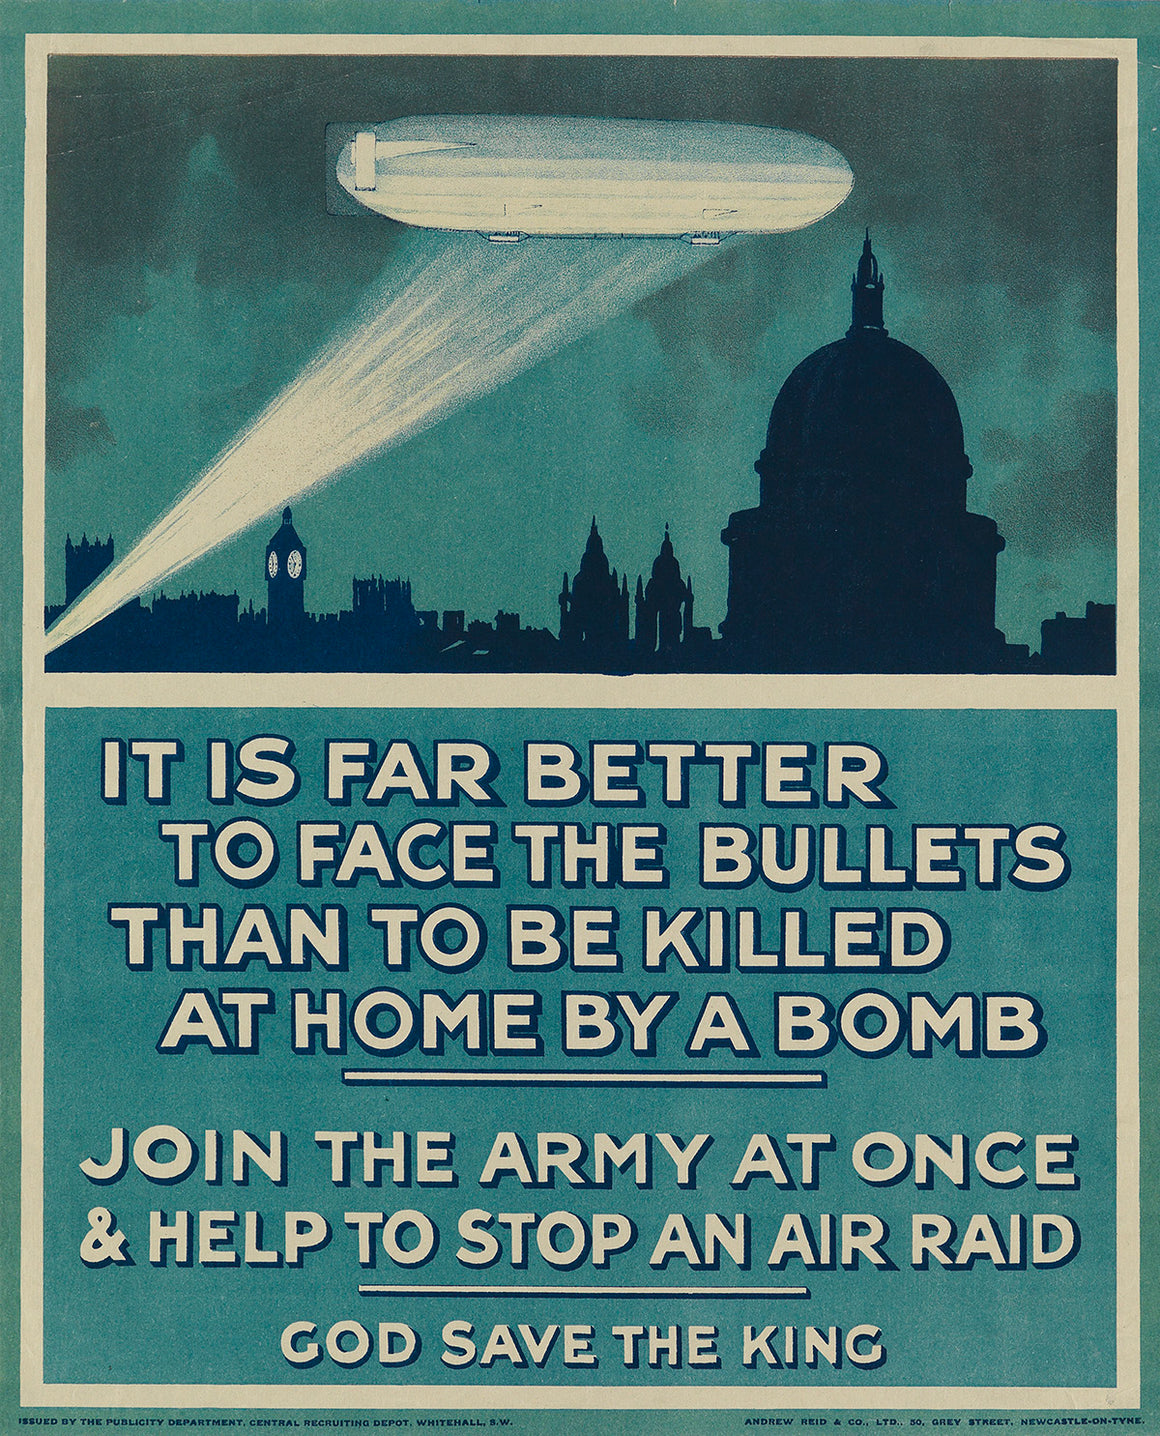 "Join the Army at Once & Help to Stop an Air Raid" Vintage British WWI Poster, 1915